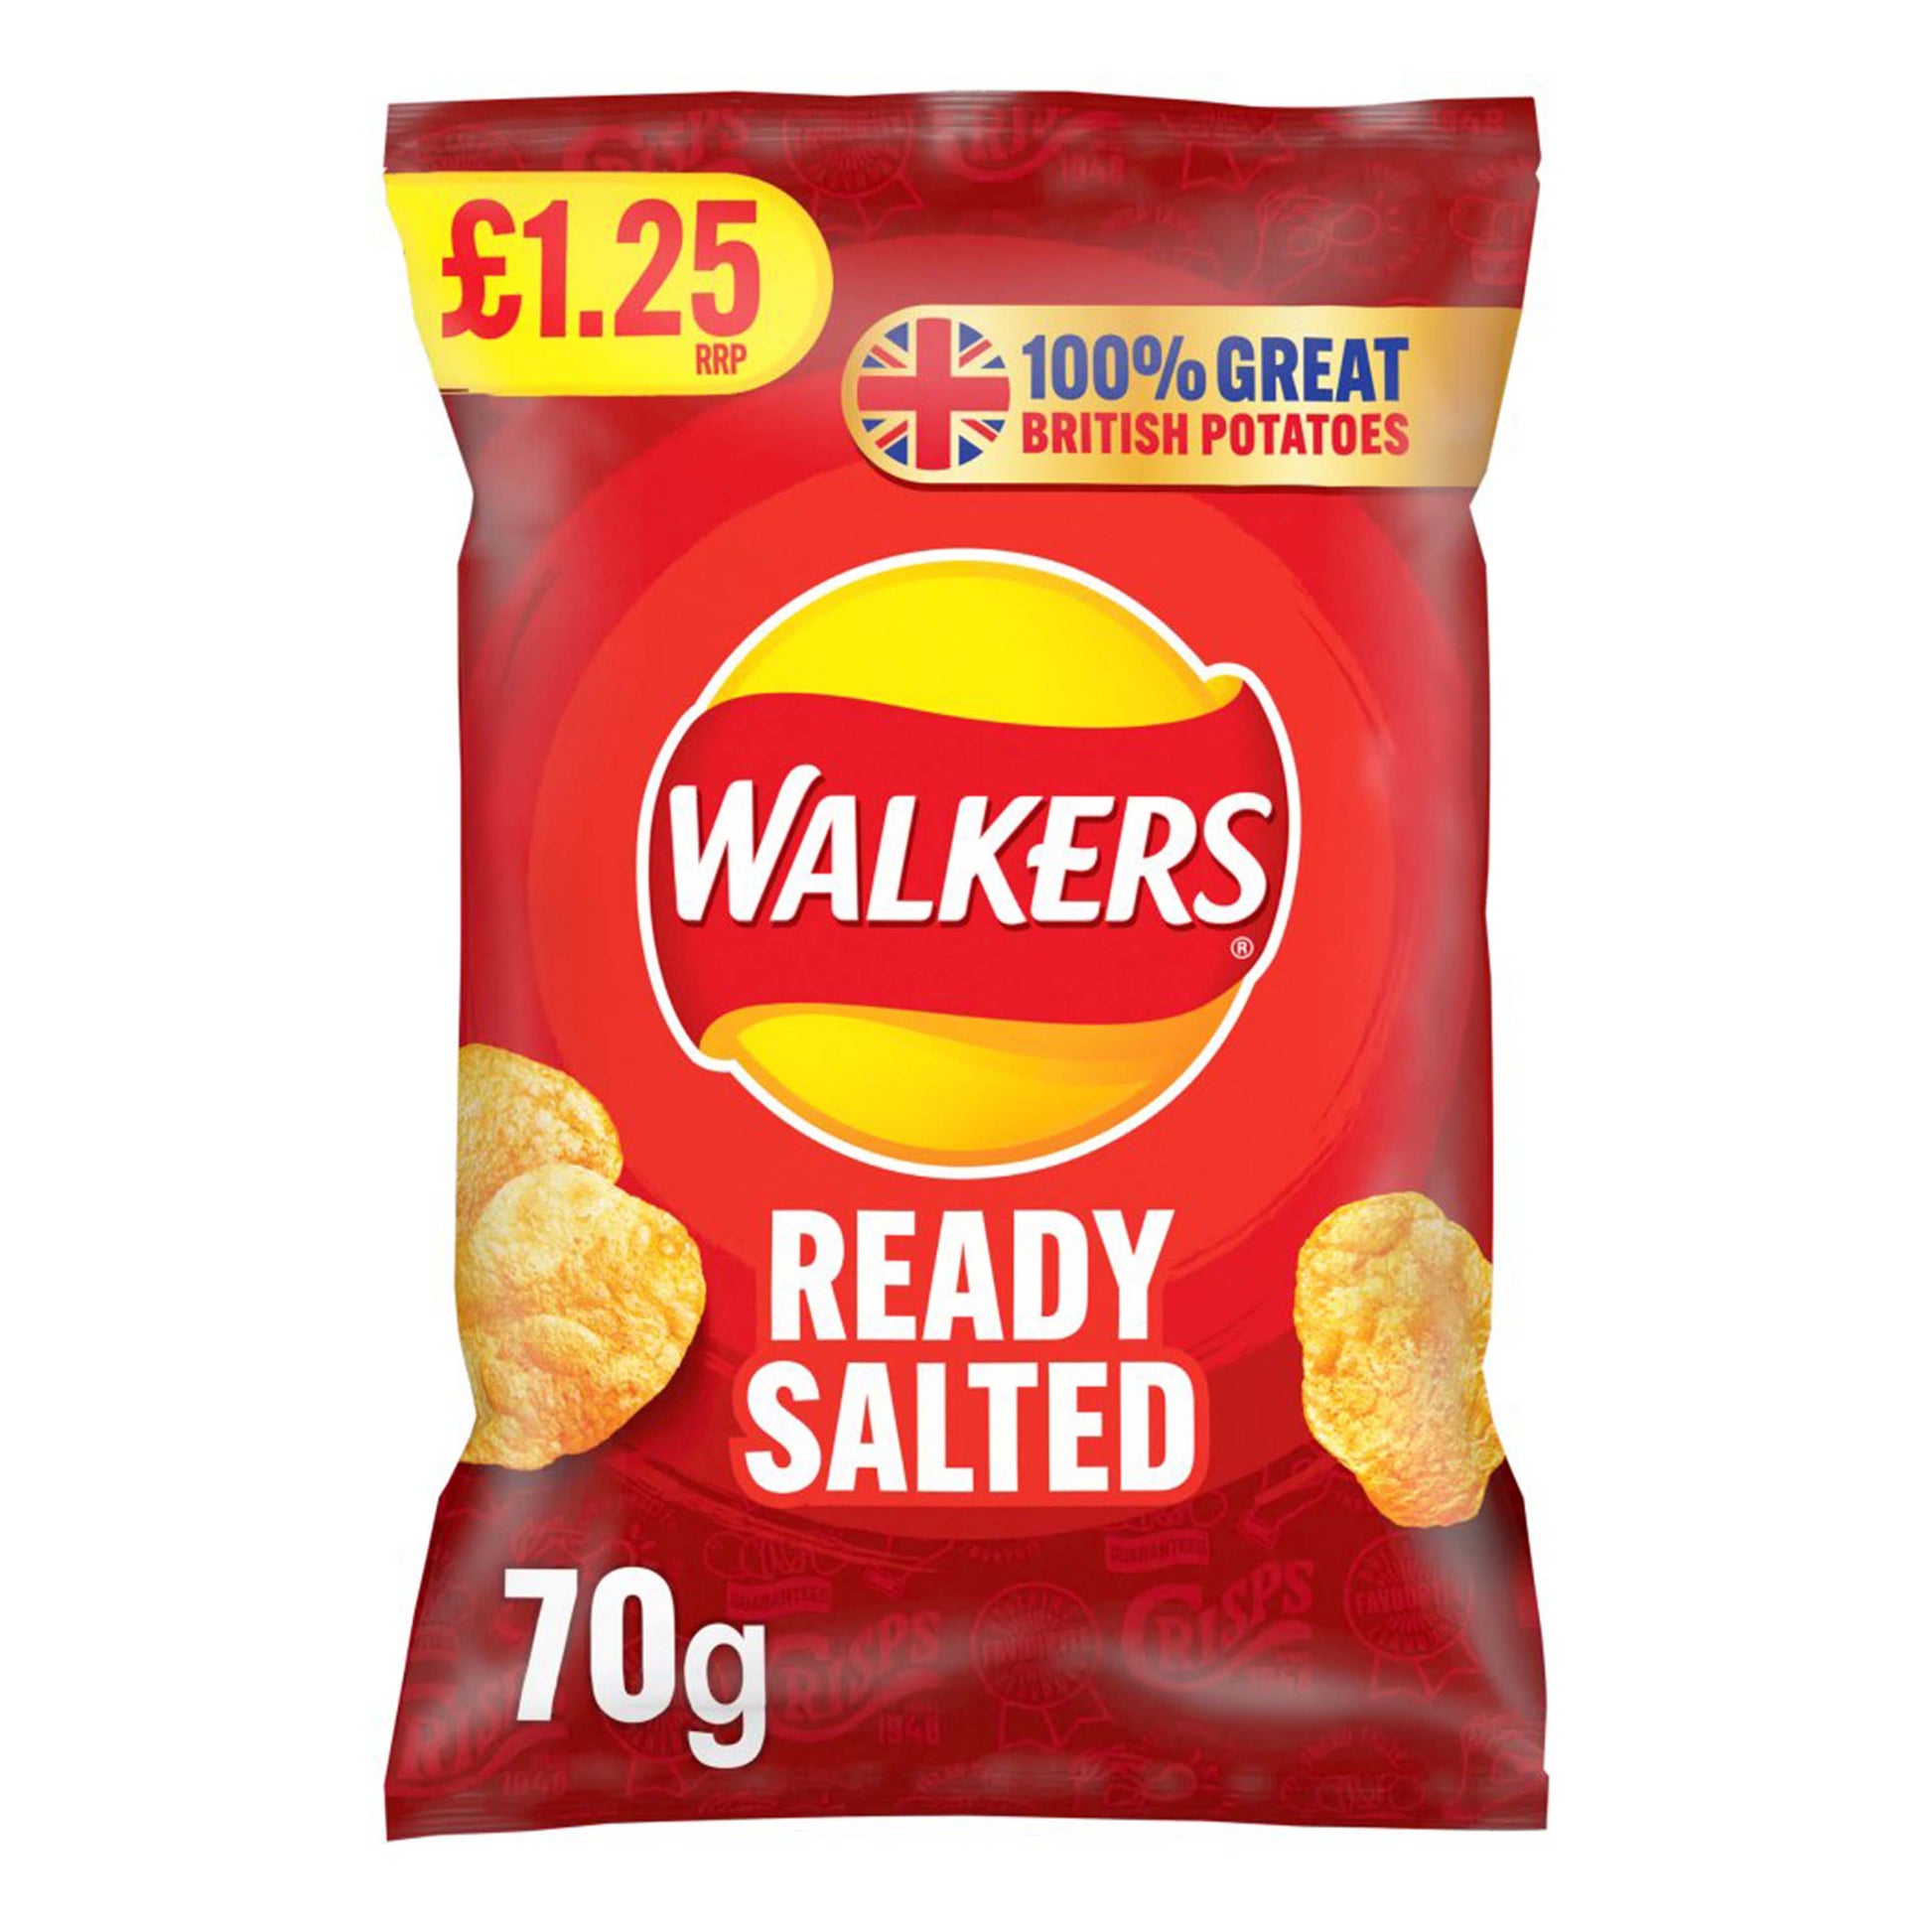 Walkers Ready Salted Crisps 70g - (£1.25 Bag) - British Gifts